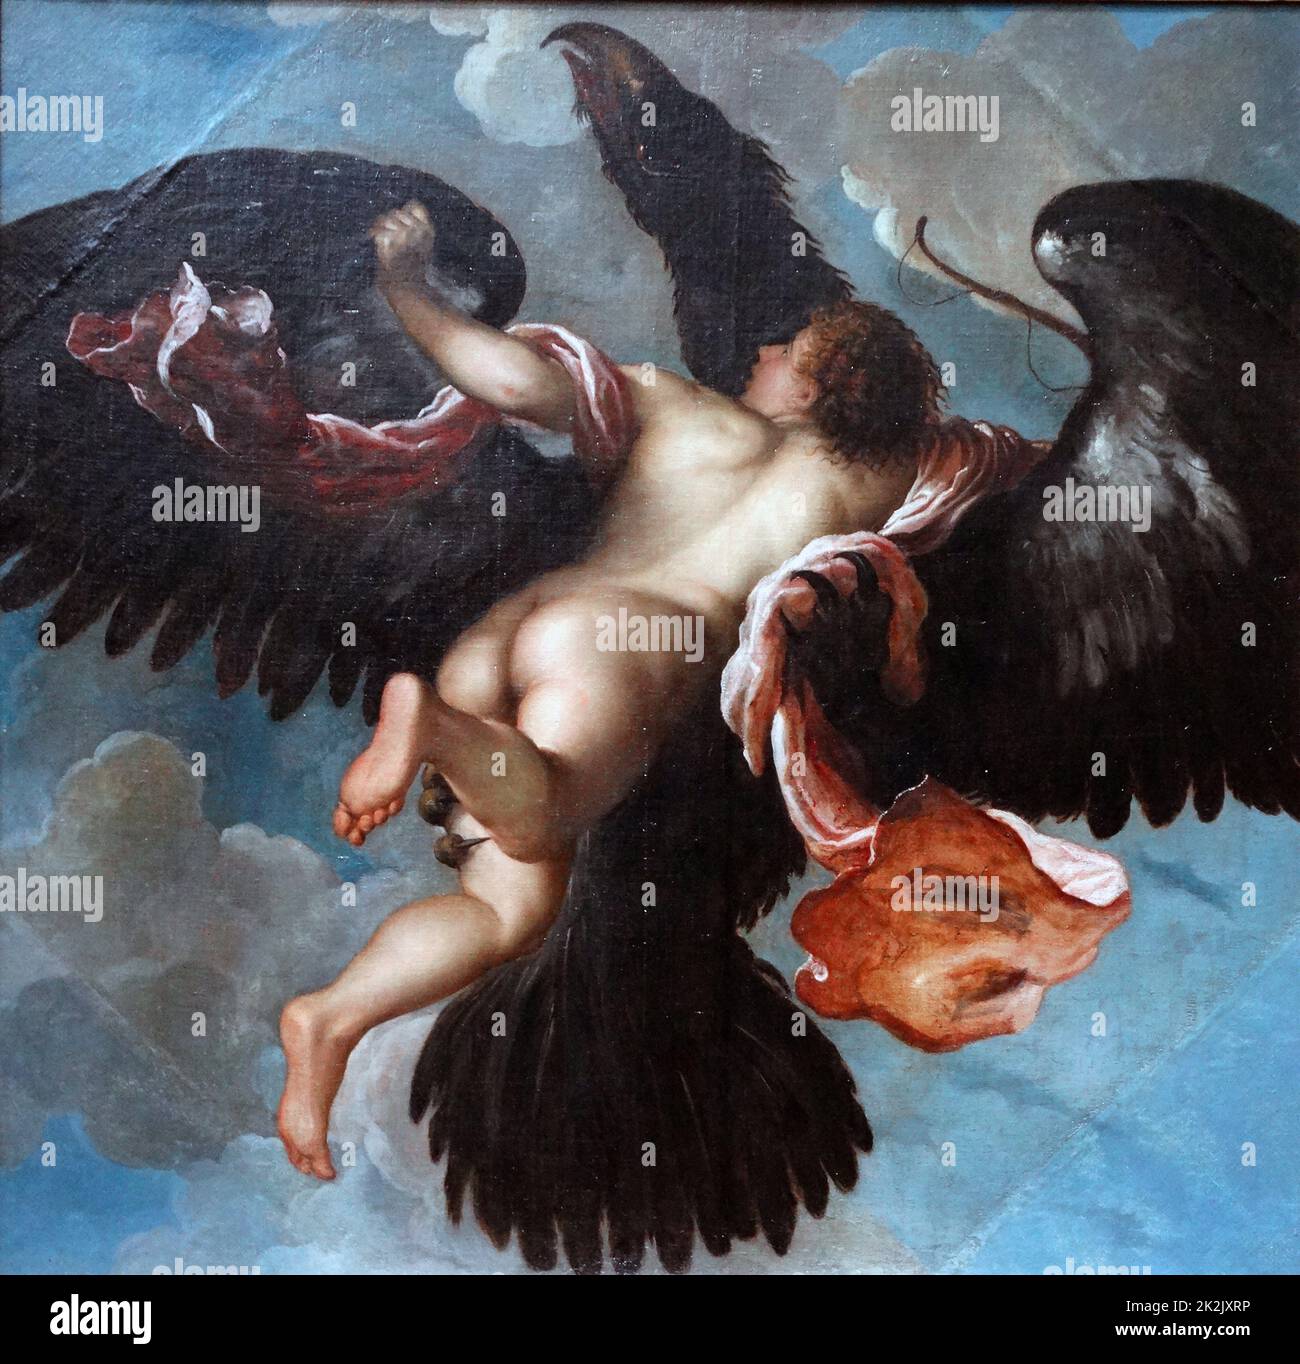 Painting titled 'The Rape of Ganymede' by Damiano Mazza, an Italian Renaissance artist. Dated 16th Century Stock Photo